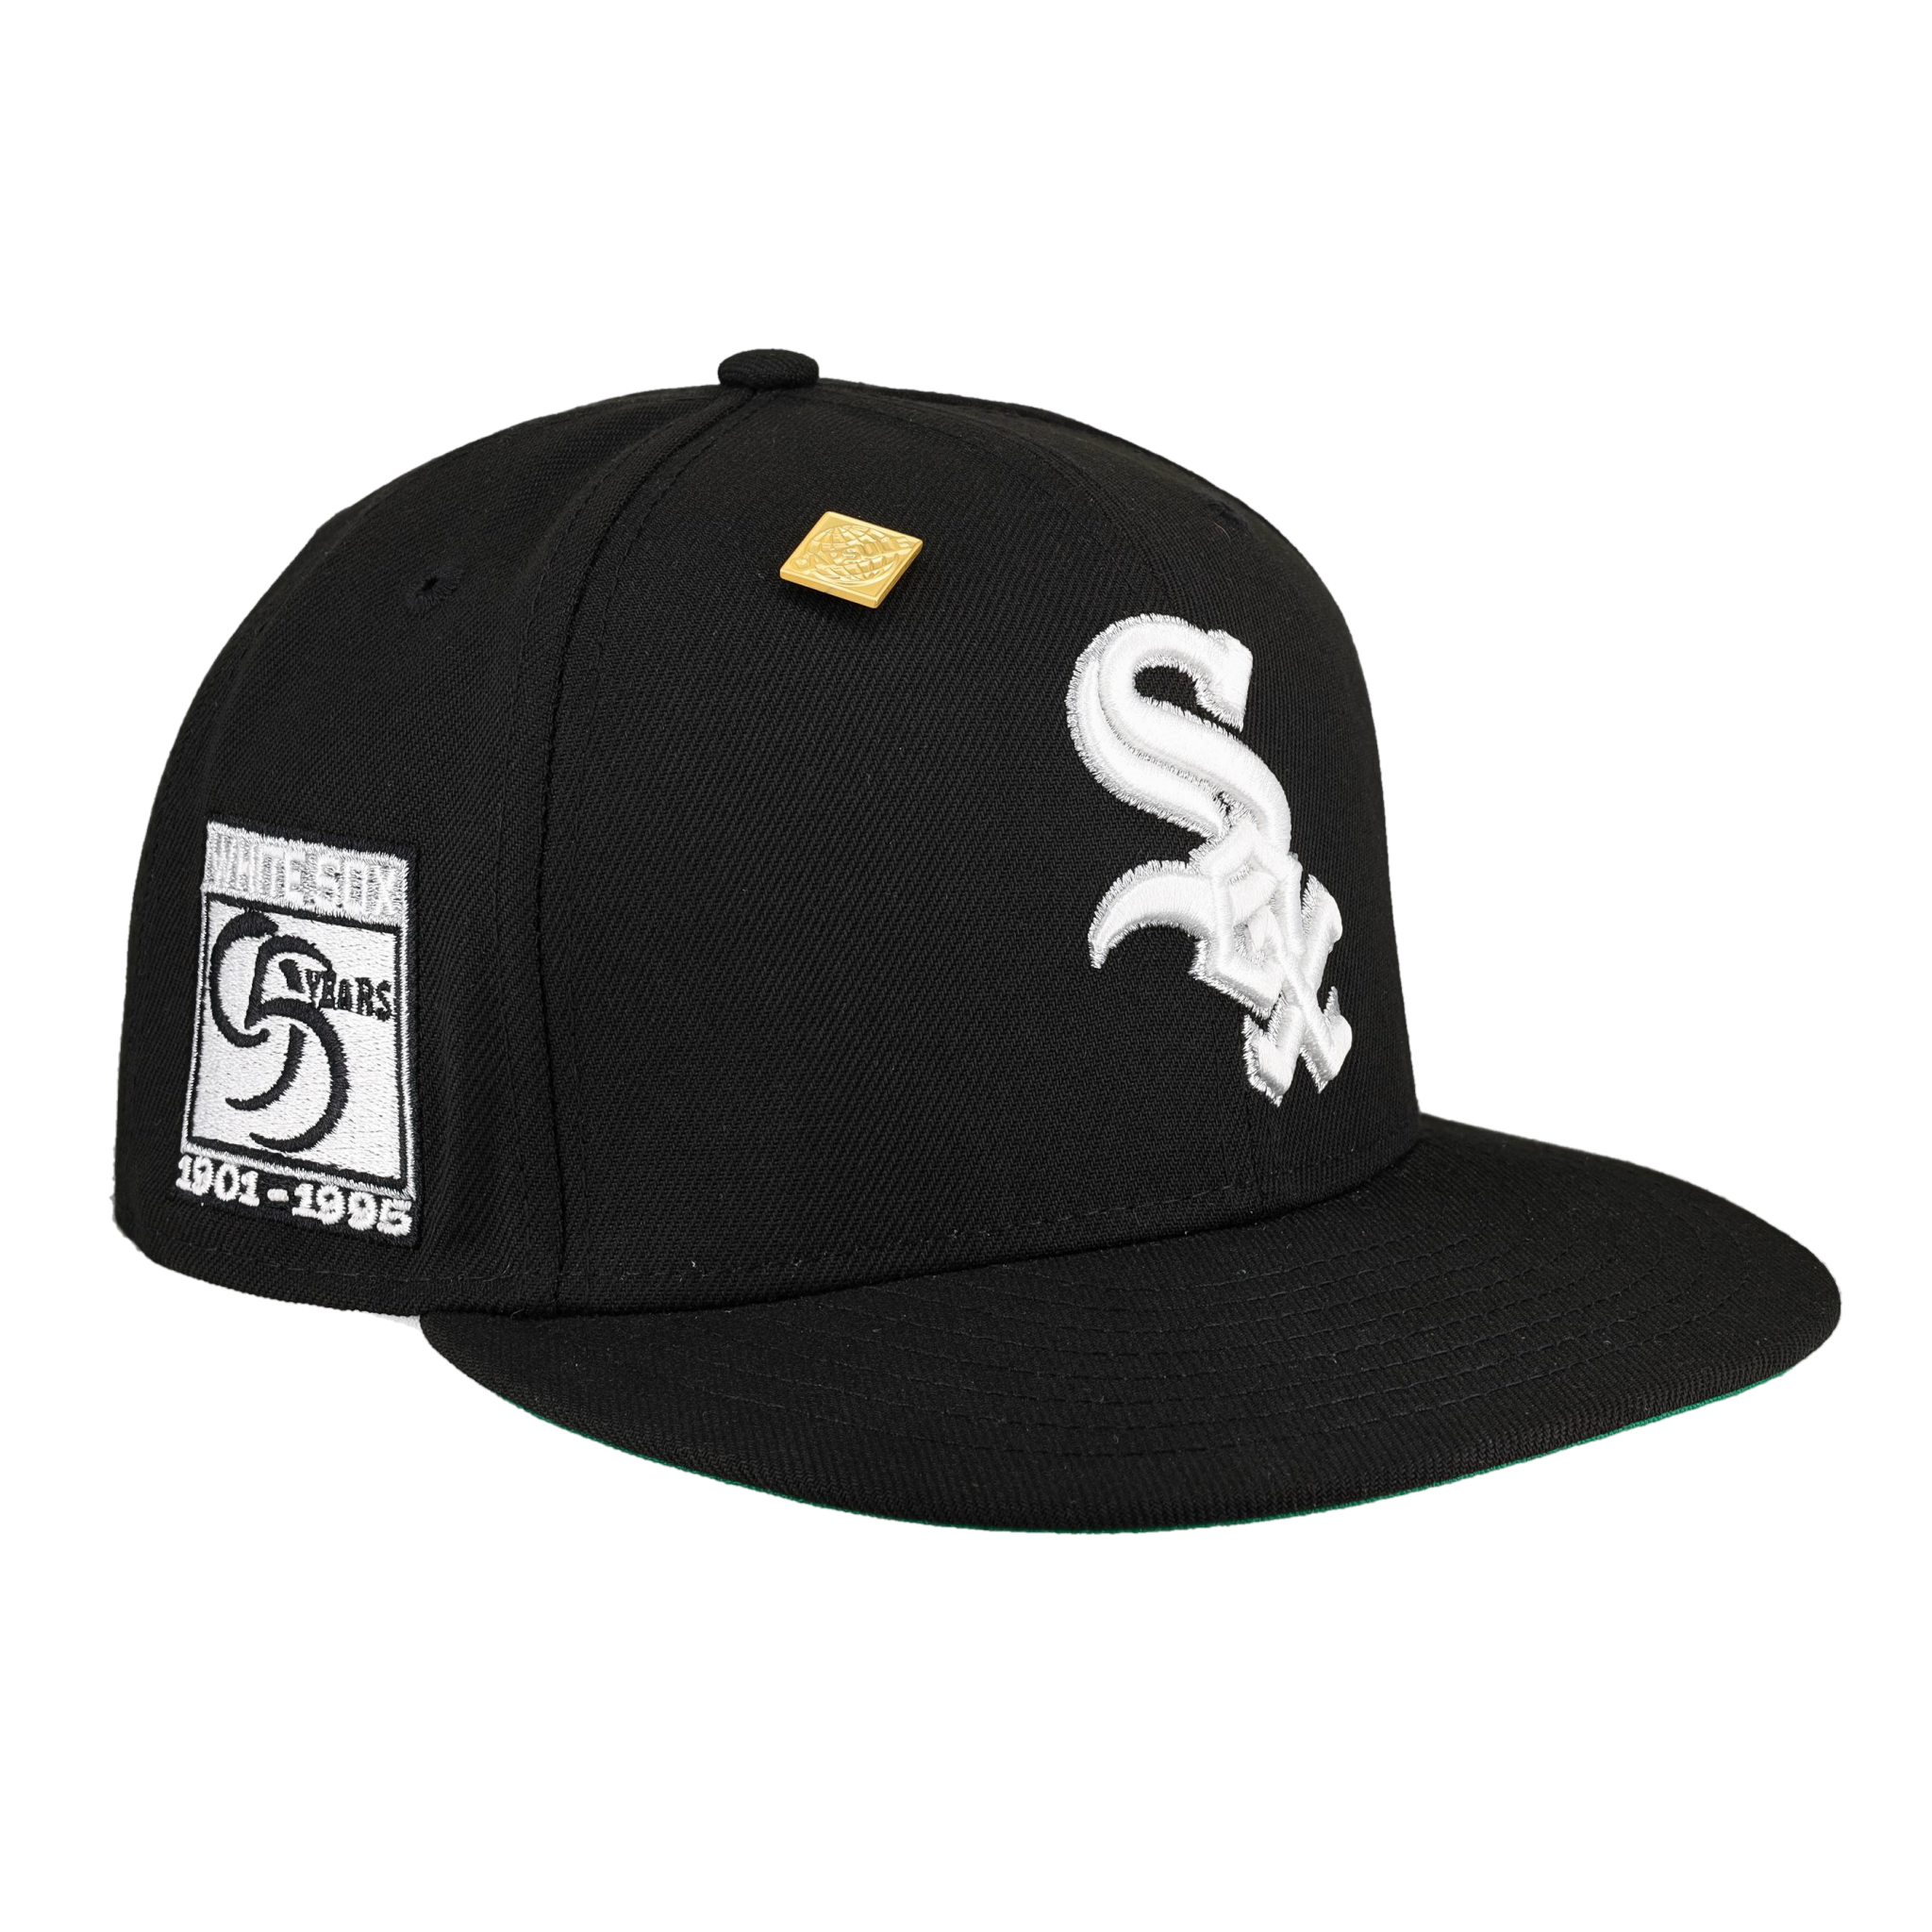 HUGE SCRIPT METALLIC CHICAGO WHITE SOX IRON-ON PATCH